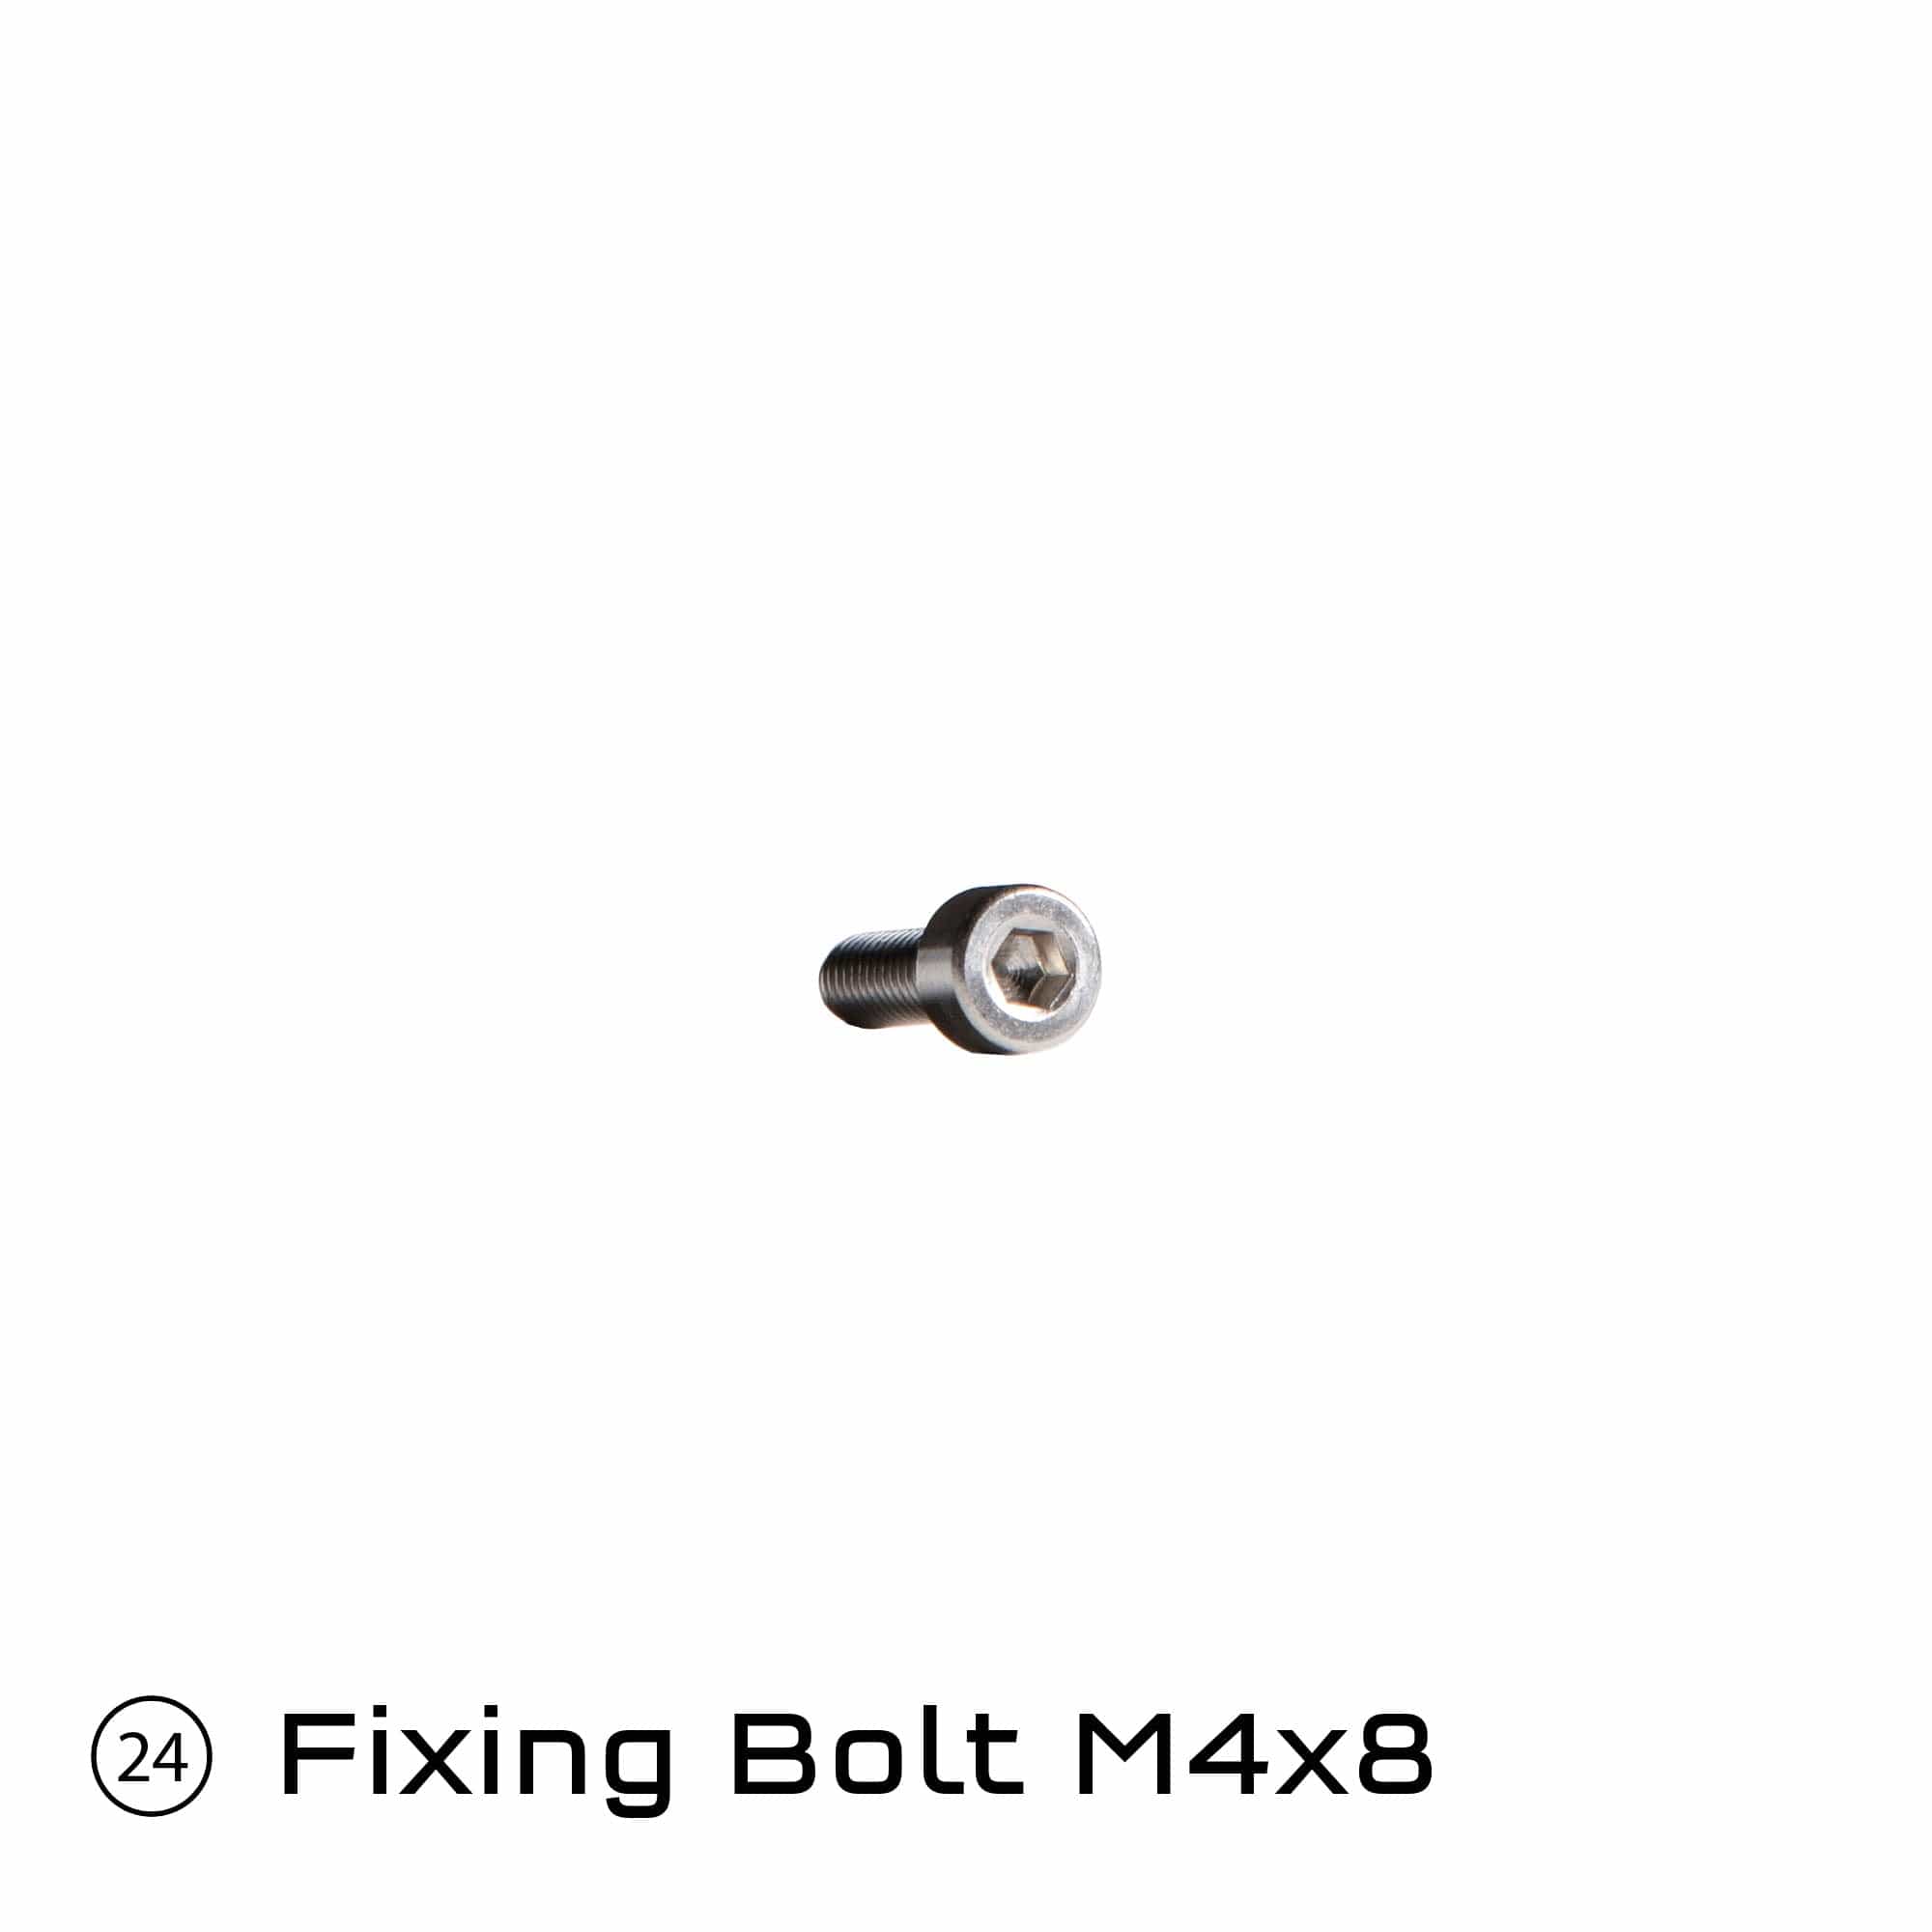 Replacement Parts / 24. Fixing Bolt M4x8 ReMote Replacement Parts